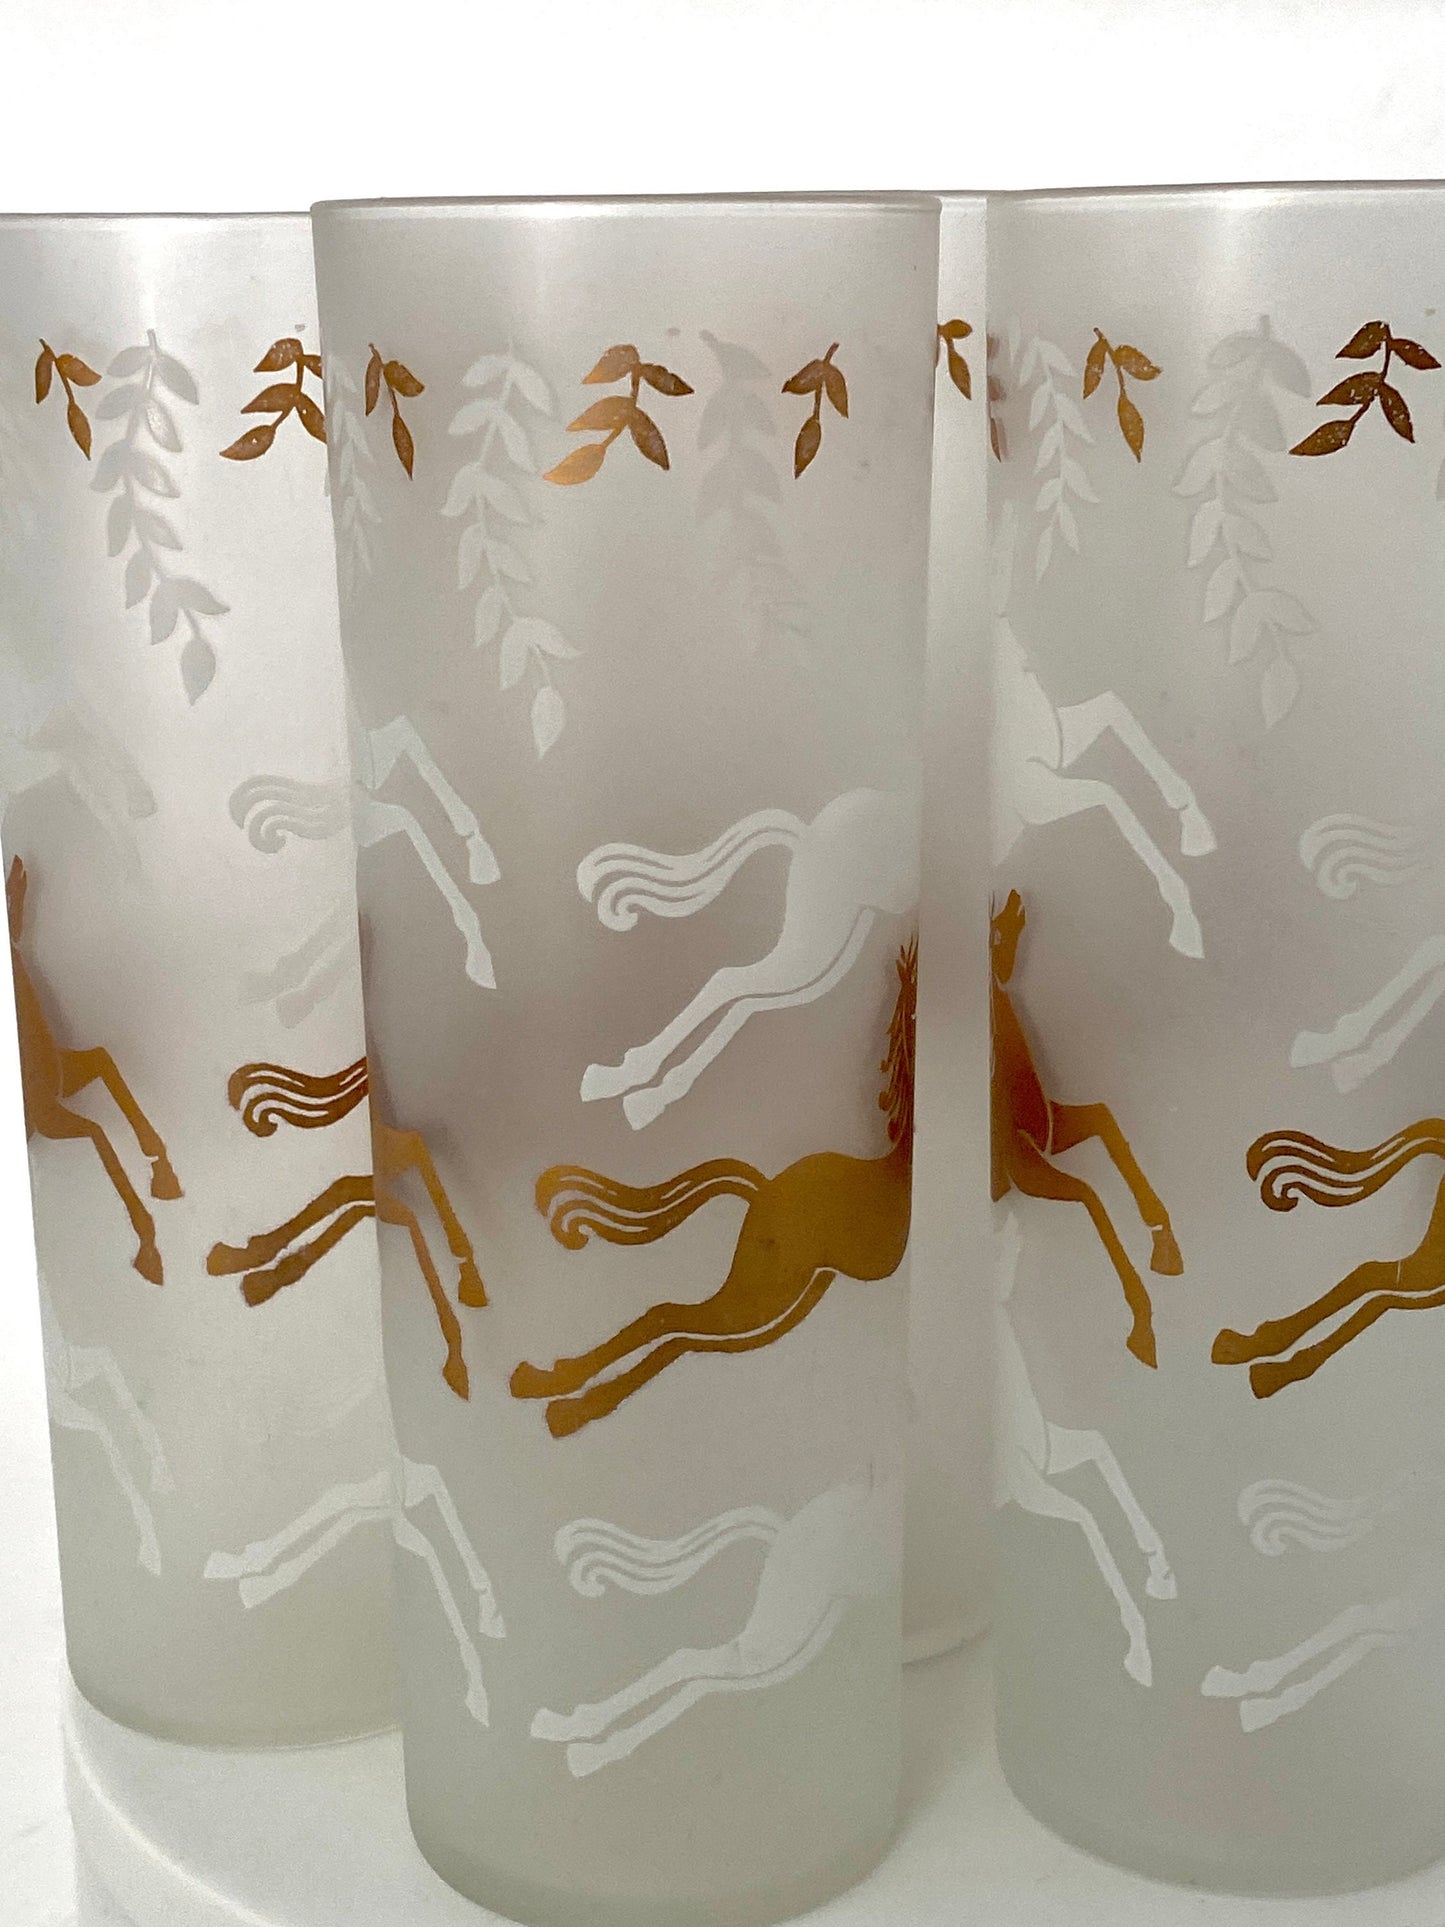 Midcentury Frosted Horse Cocktail Glasses